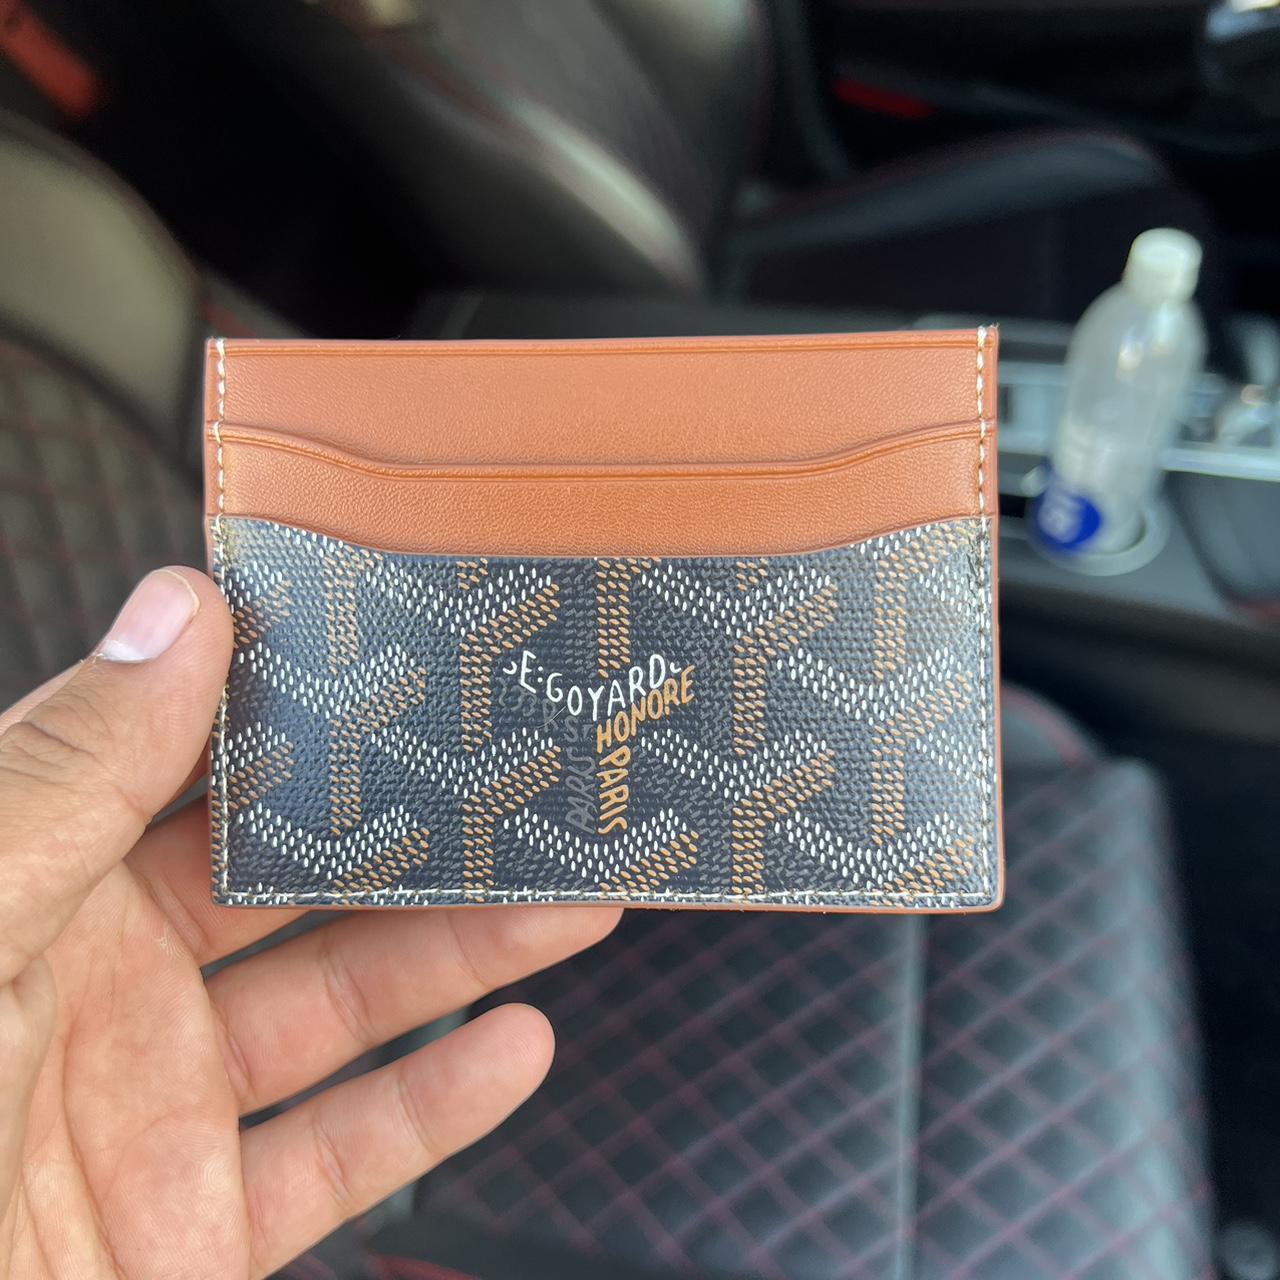 Goyard Cardholder - Black, Comes with box and all